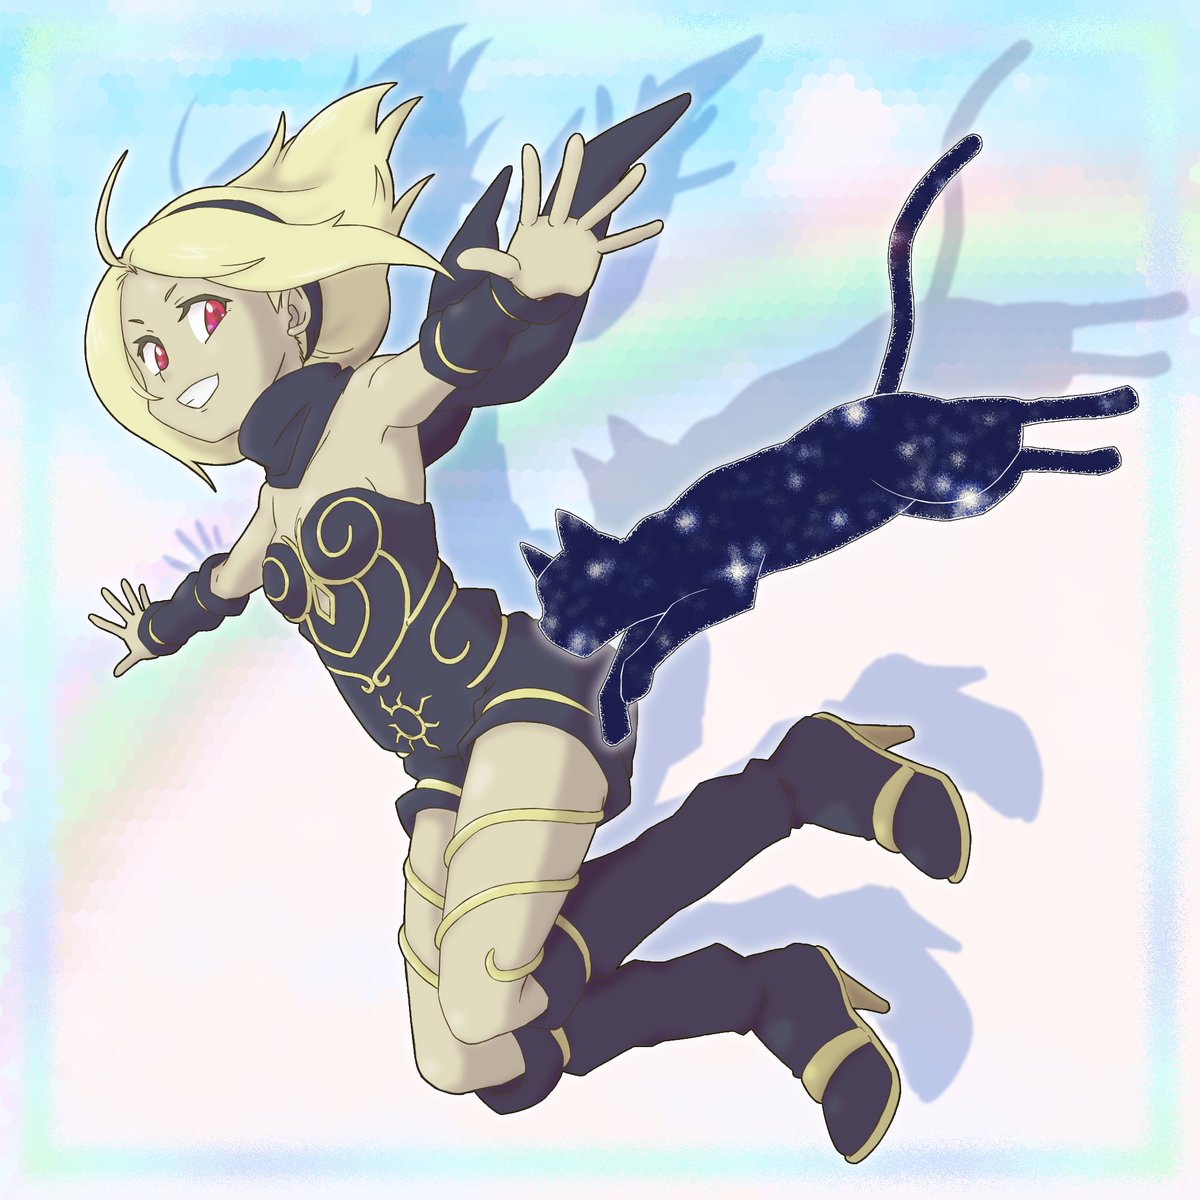 #gravityrush
#DAYSGONE
#Patapon
I'm looking forward to sequels and remakes of these games.
HBY